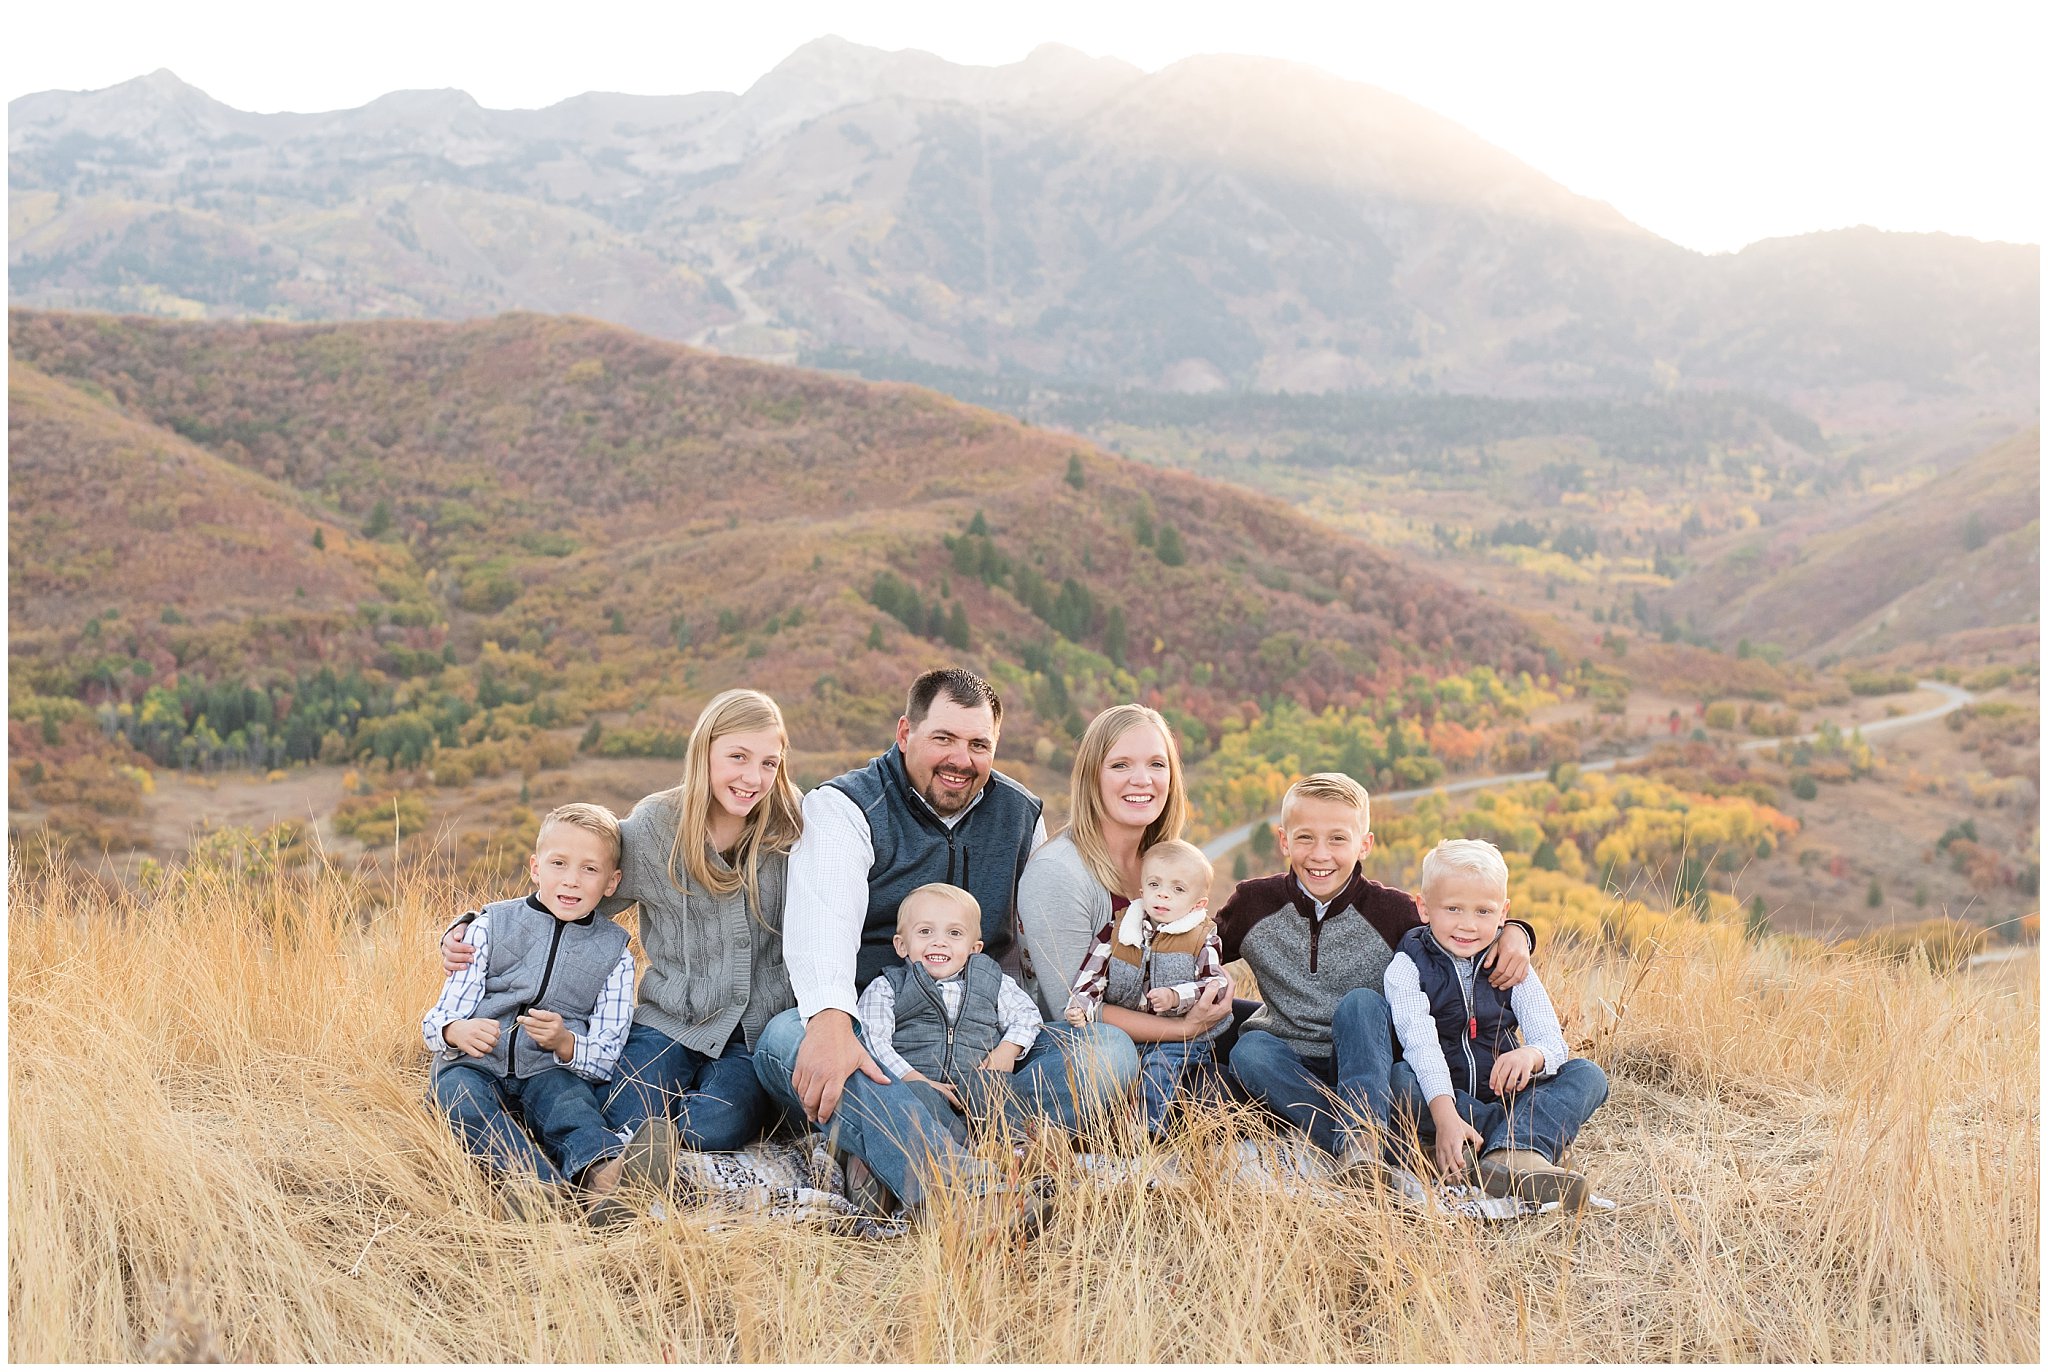 Family of 8 portrait in the mountains | Fall family photo session at Snowbasin | Snowbasin Resort | Jessie and Dallin Photography